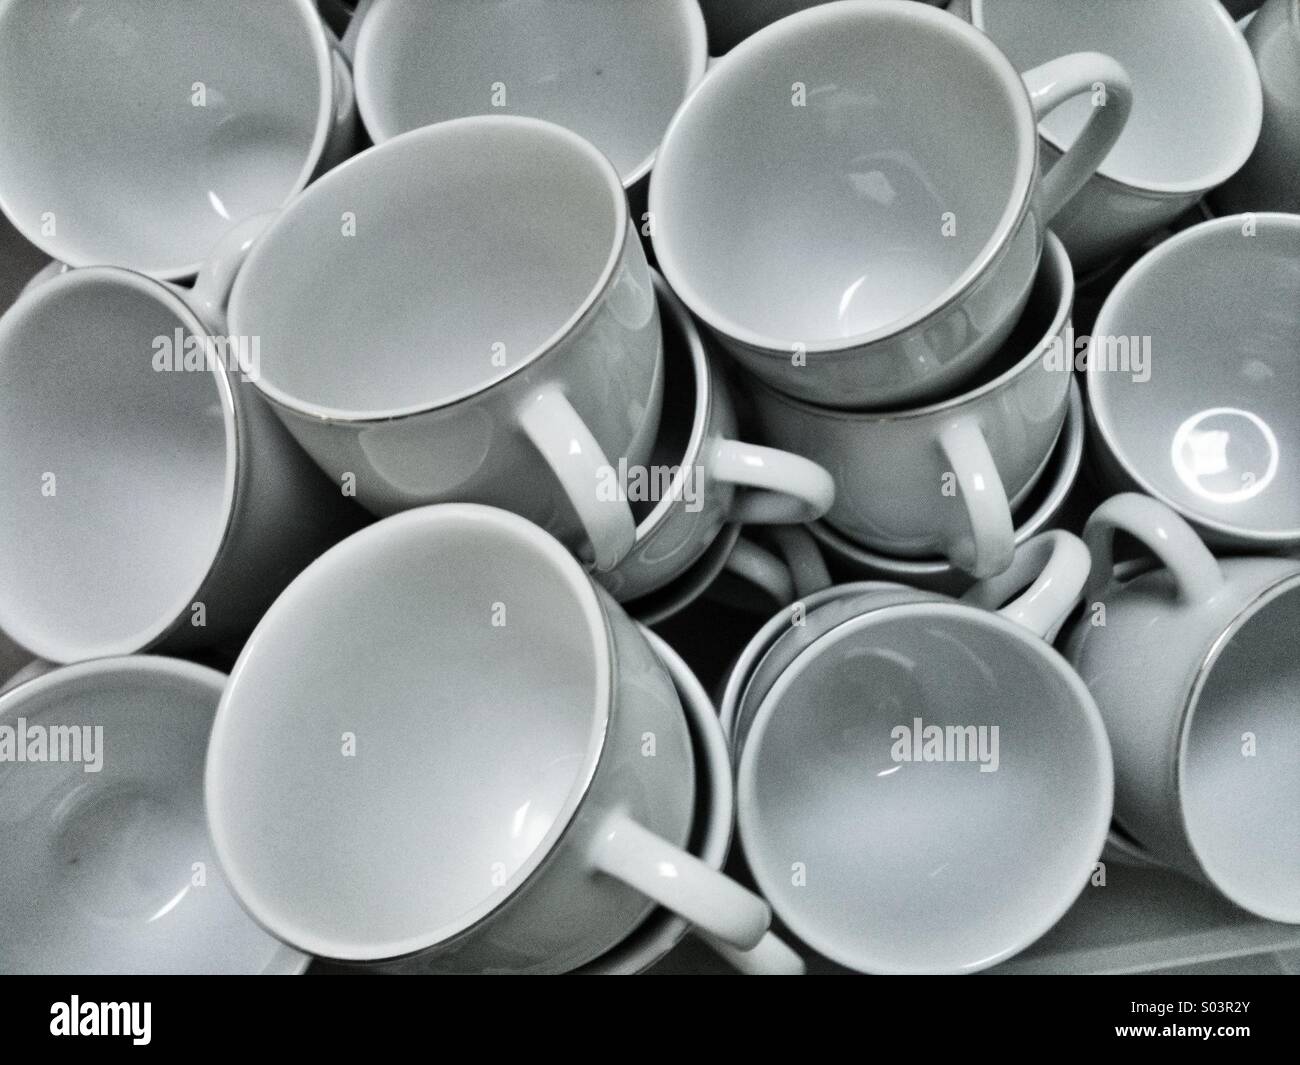 Pile of plain white cups Stock Photo